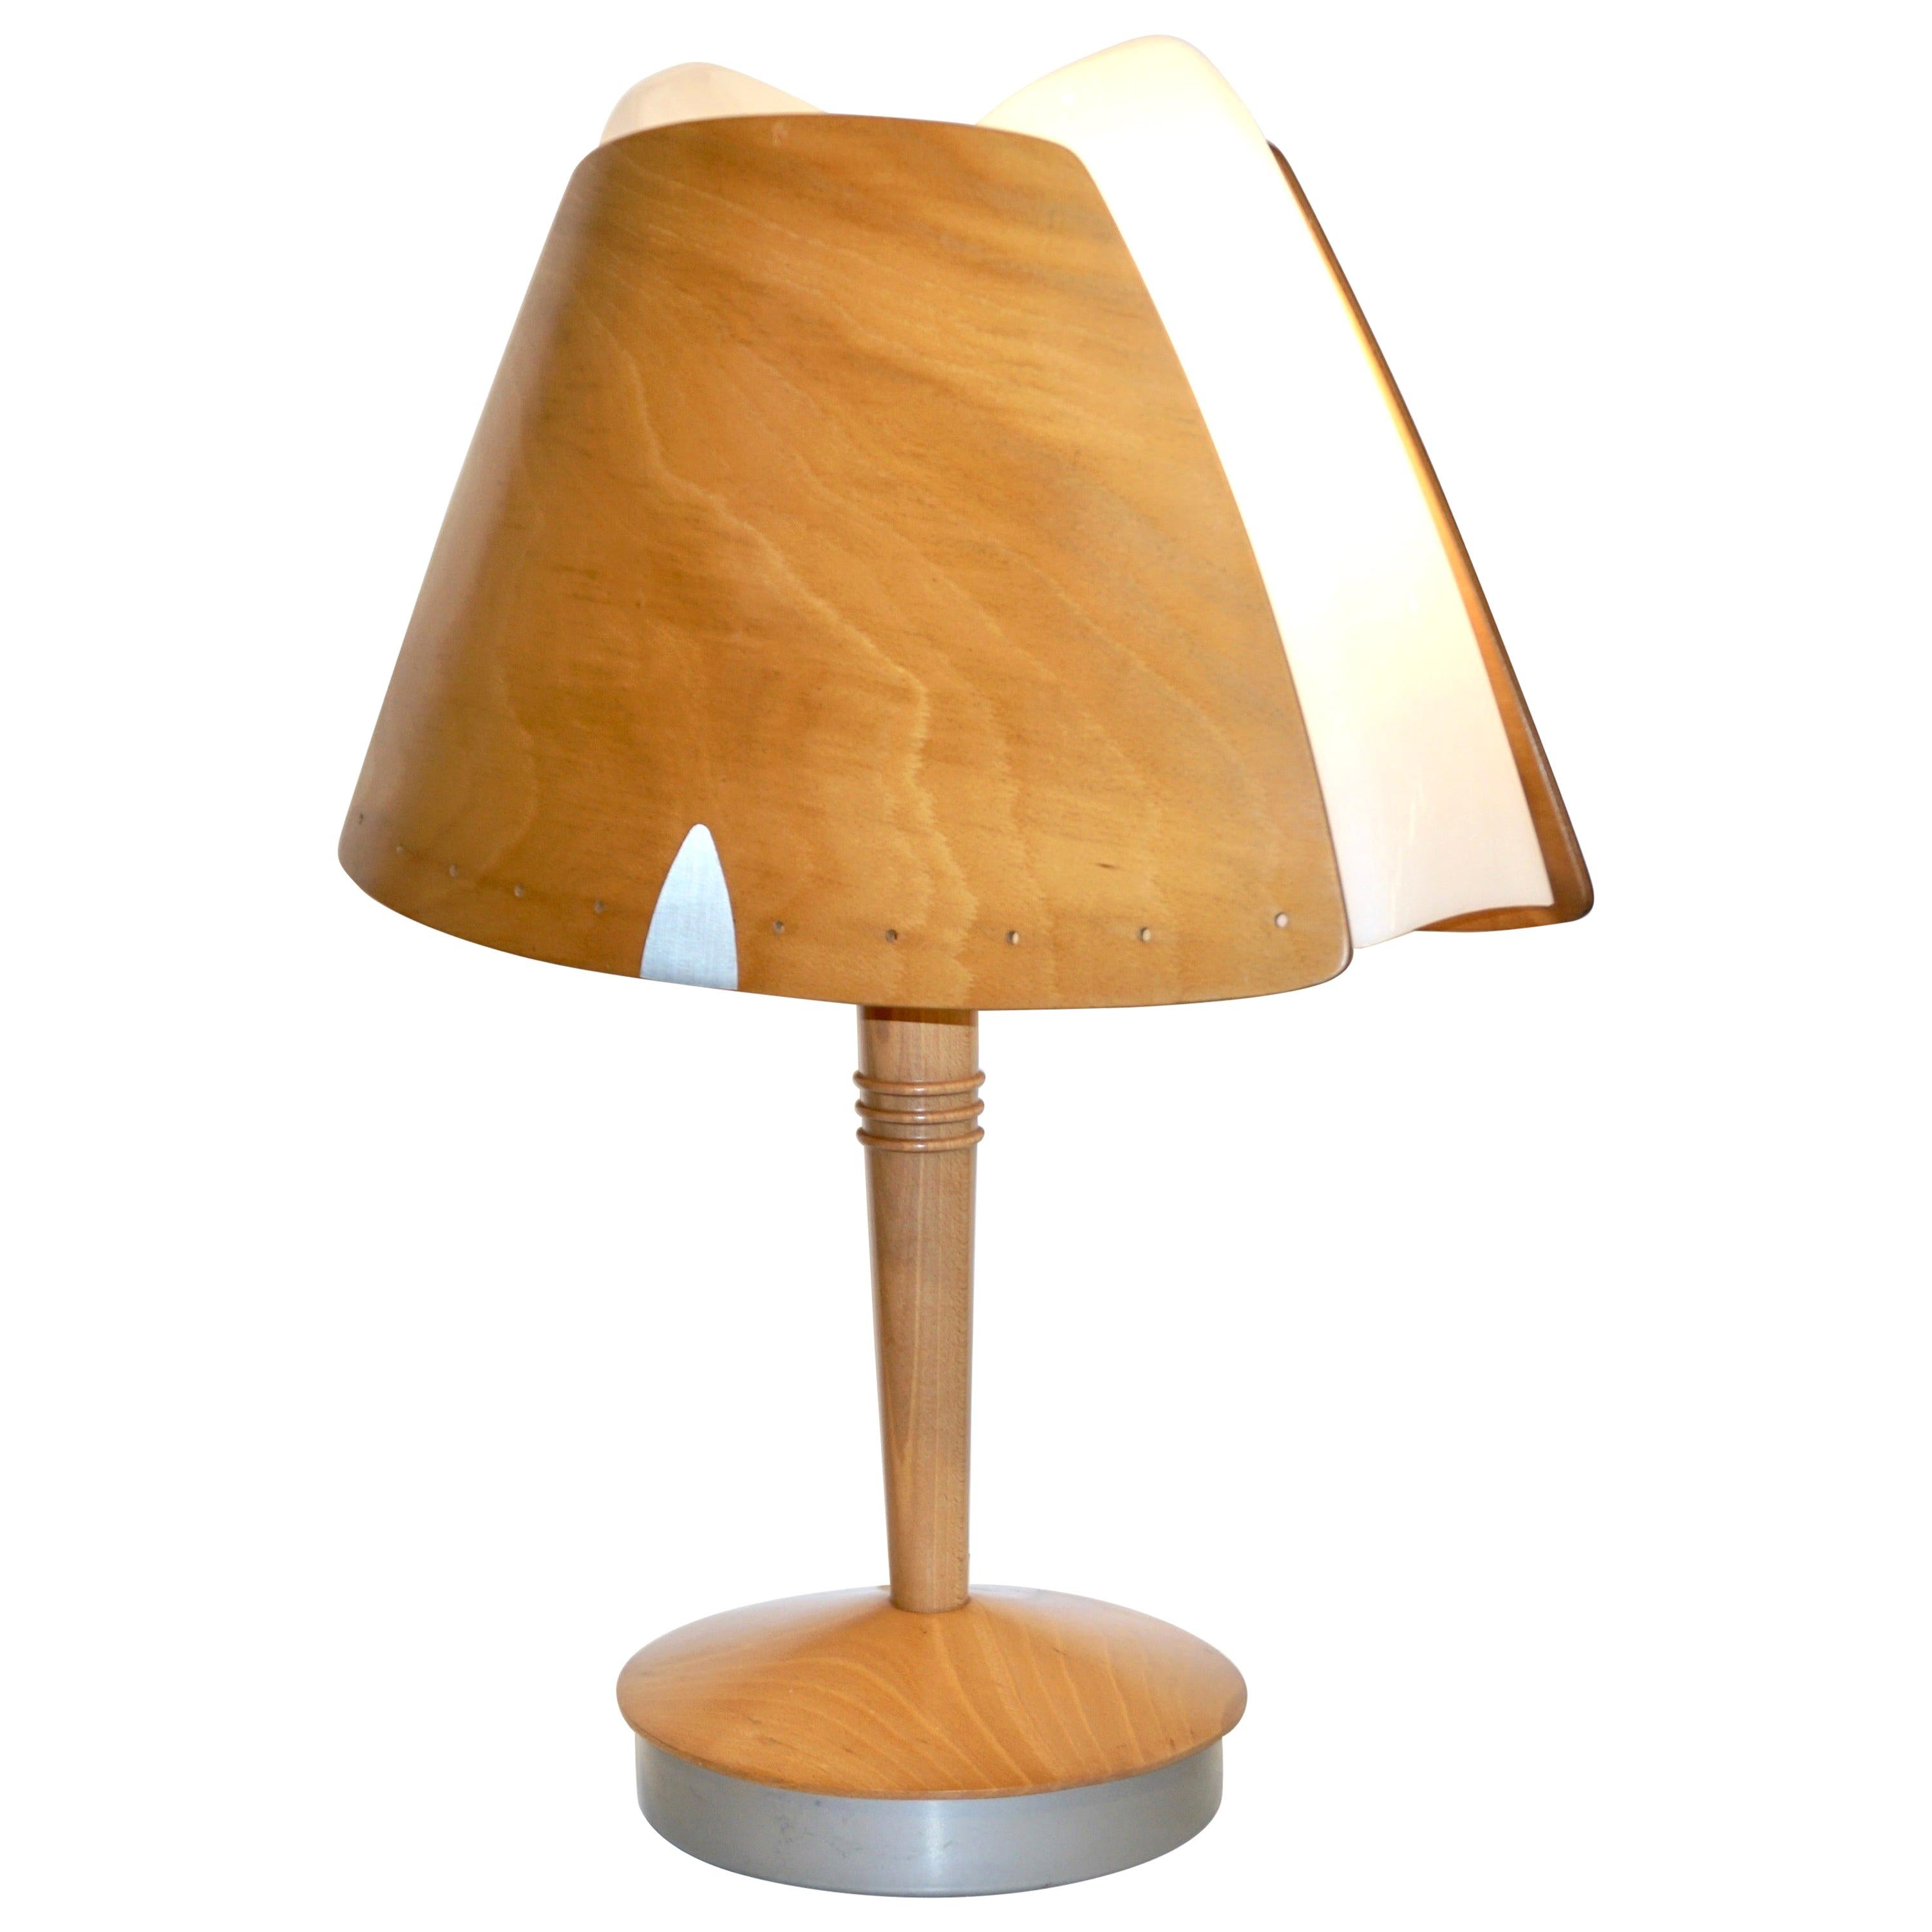 2 Pairs available - very attractive French Mid-Century Modern design vintage lamps, custom made in an organic Scandinavian style by the brand Lucid for the Hilton Hotel in Barcelona, Spain. 
The plastic plexiglass shade designed with a protruding